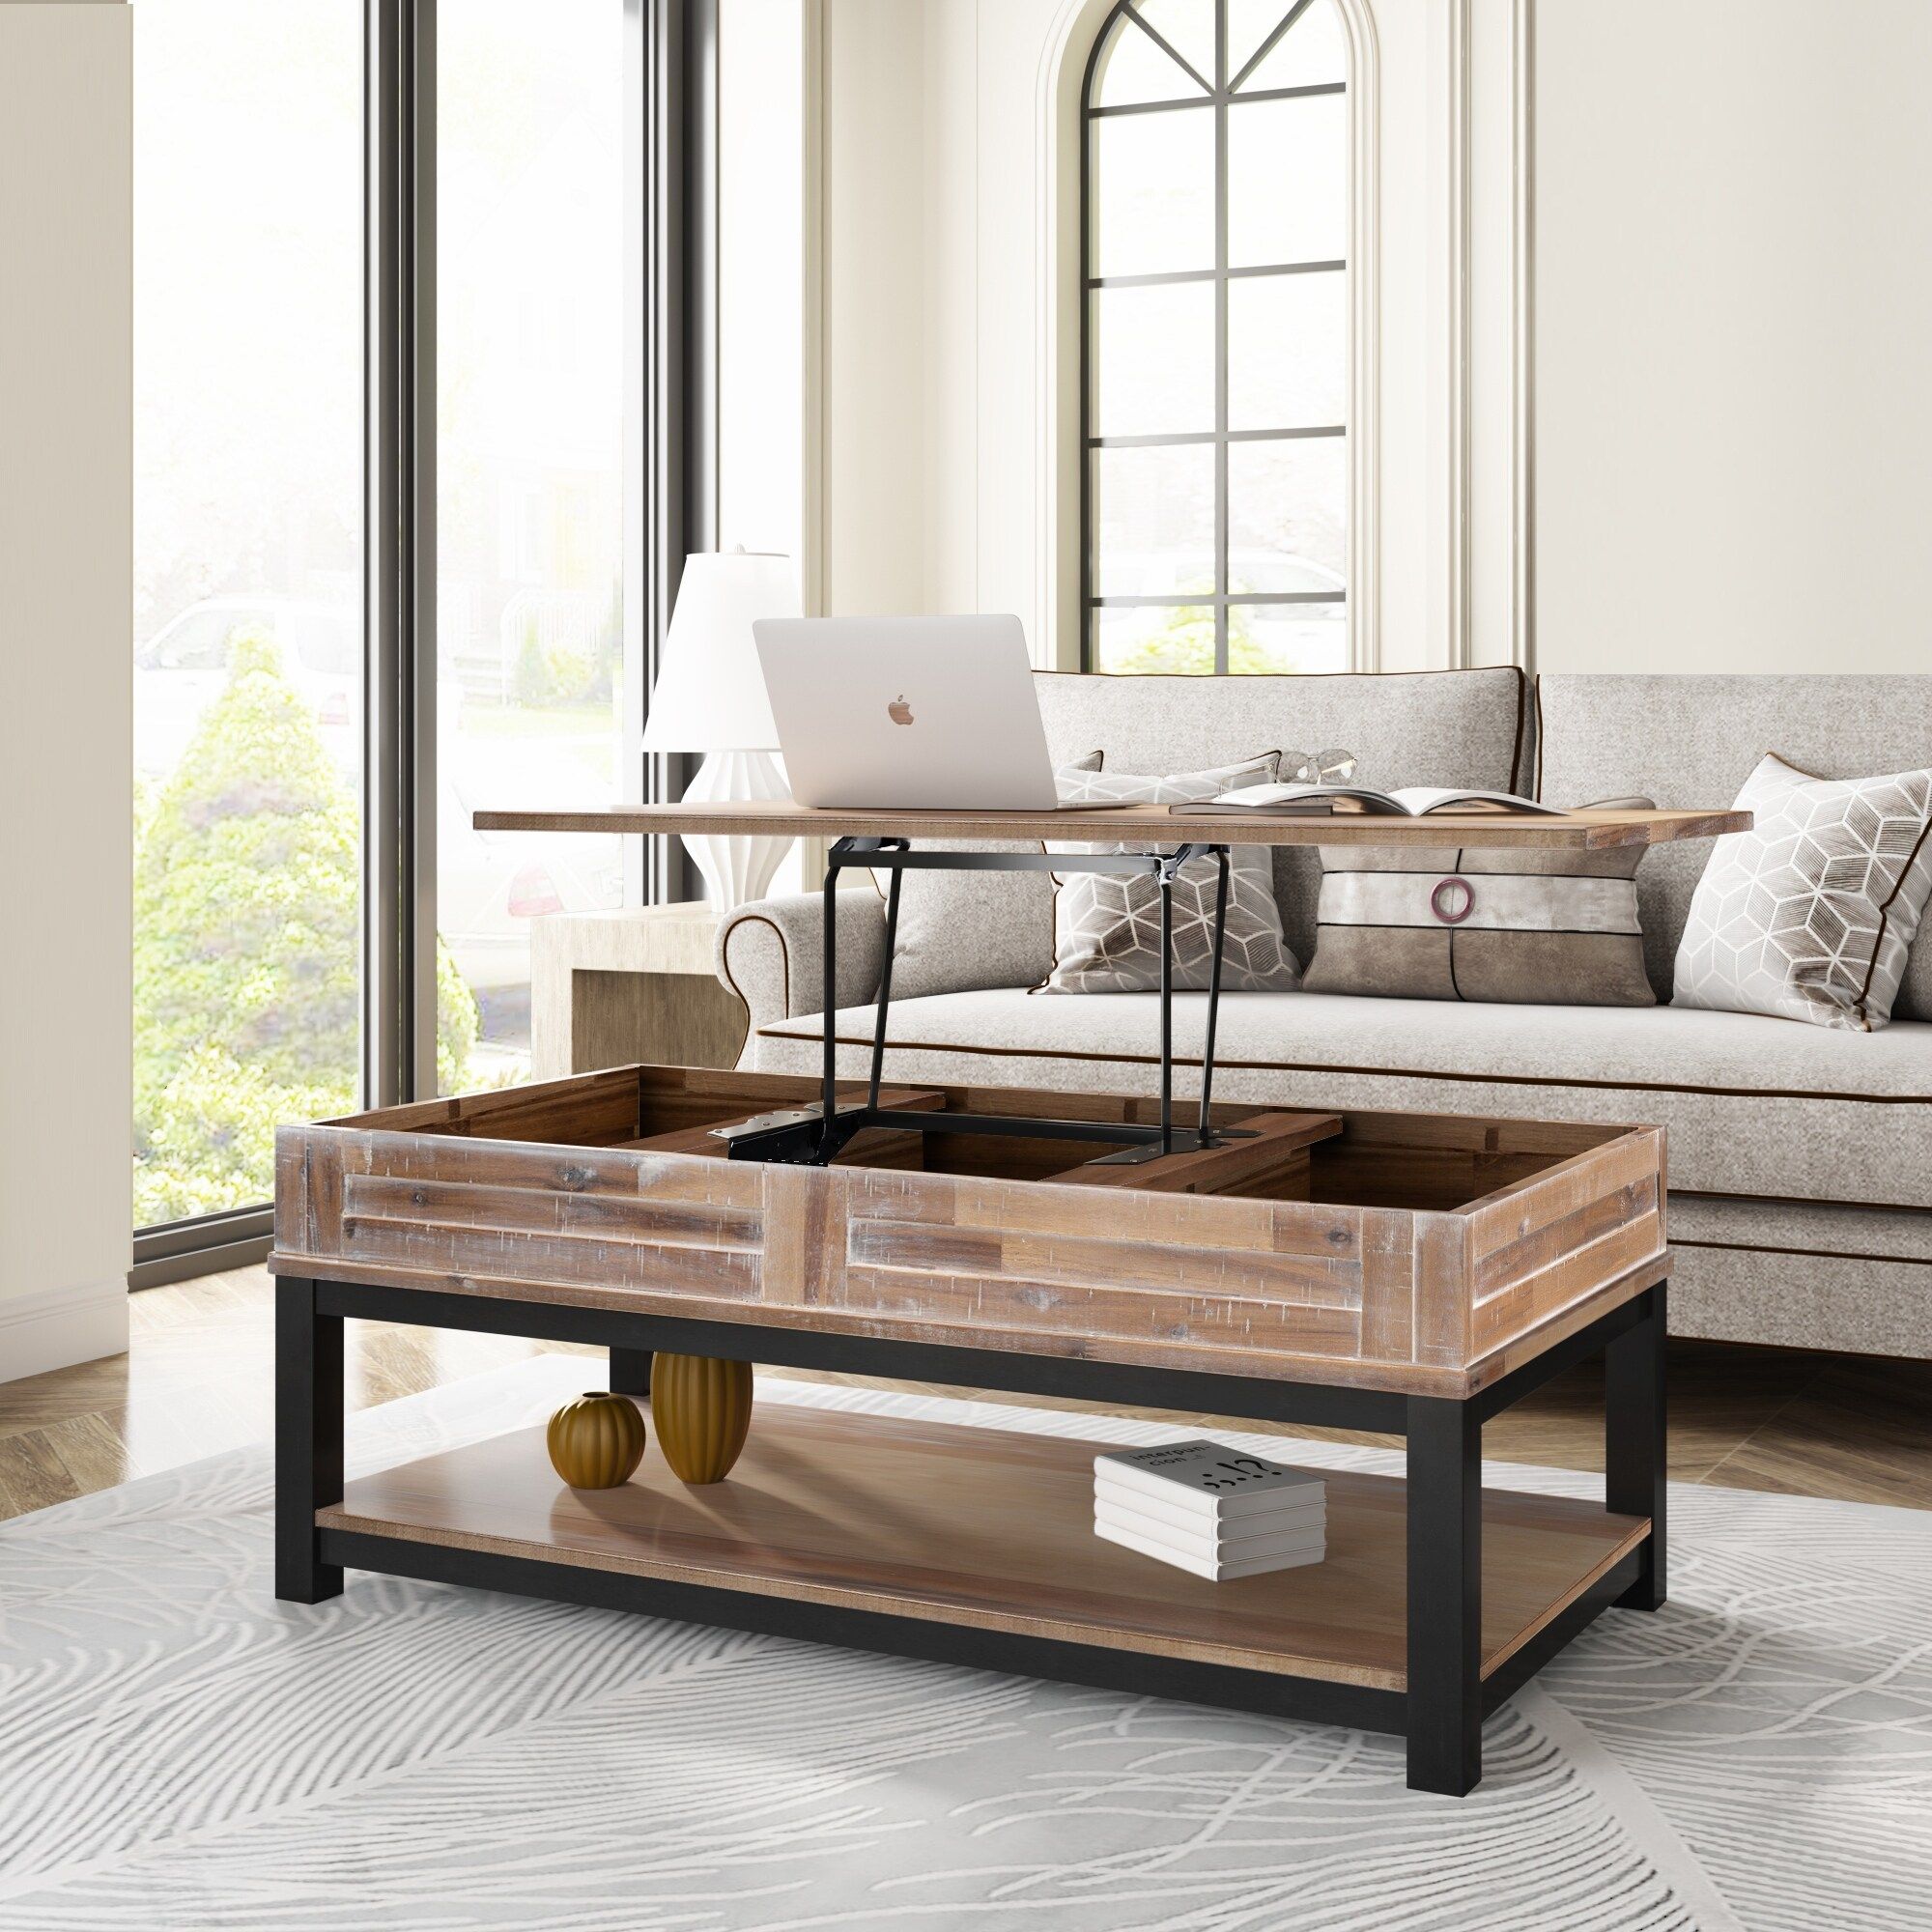 Wooden Lift Top Coffee Table With Inner Storage Space And Shelf – Bed Bath  & Beyond – 36909922 Regarding Lift Top Coffee Tables With Shelves (Photo 10 of 15)